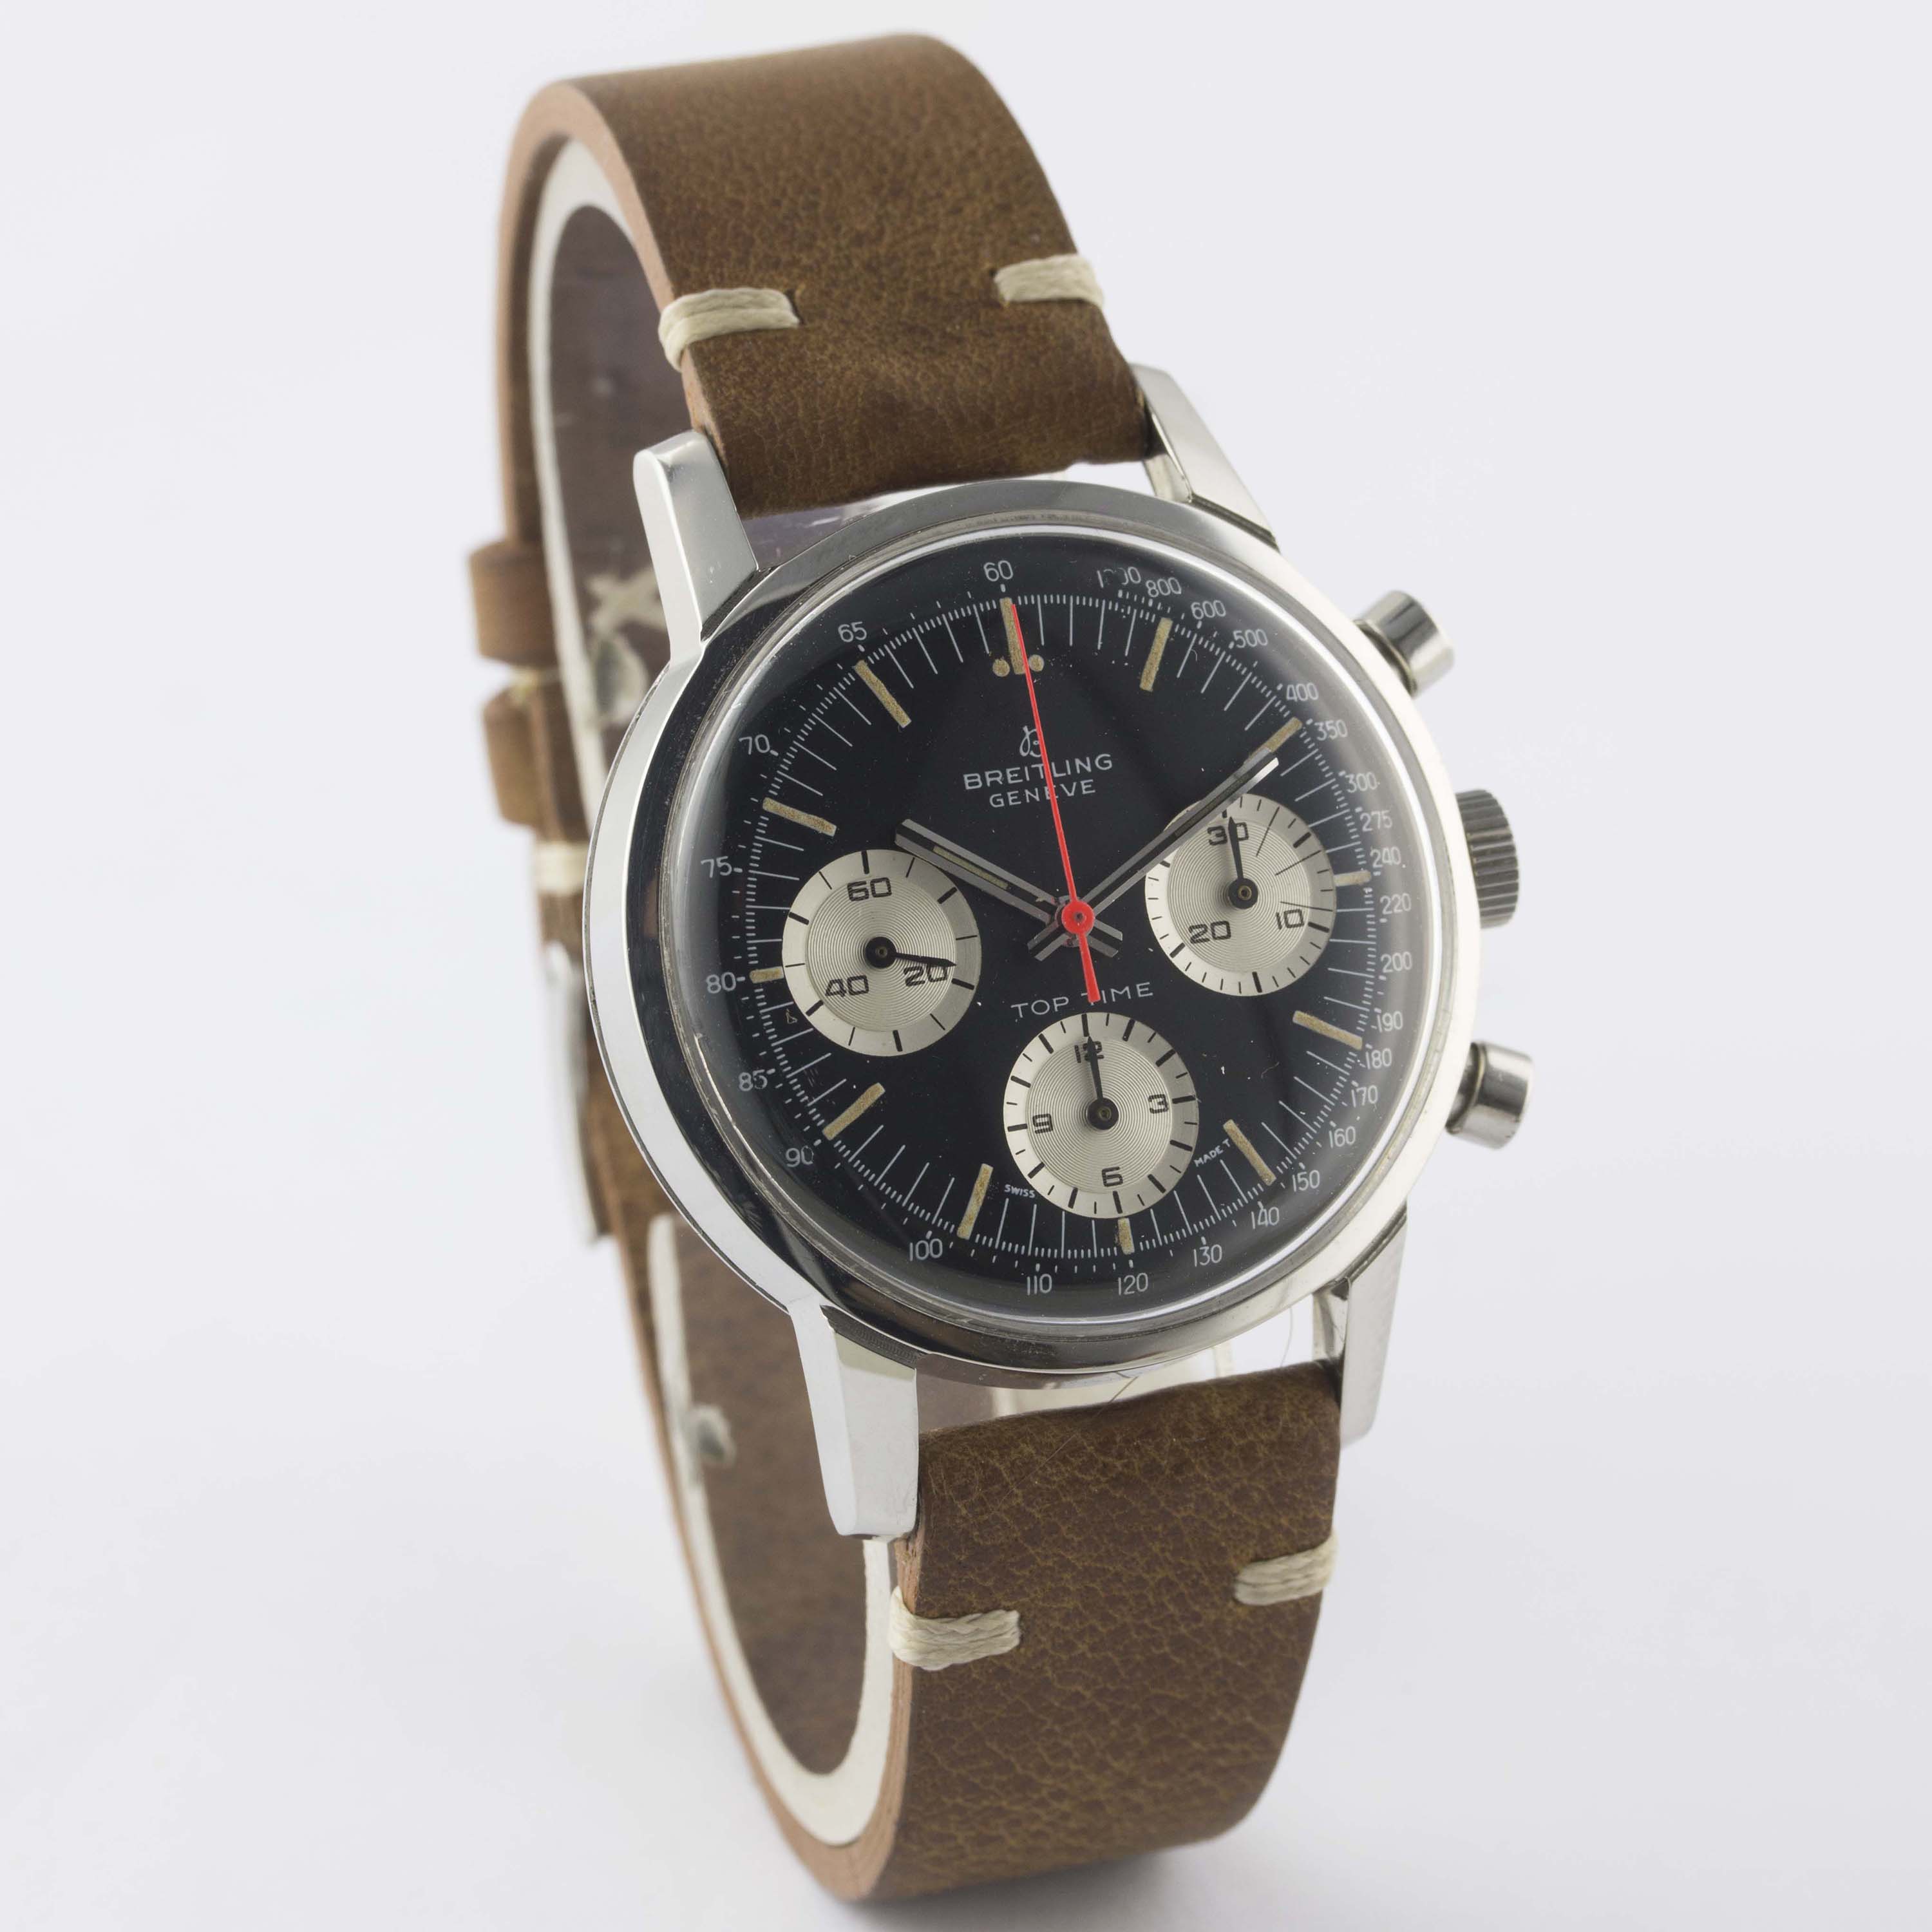 A RARE GENTLEMAN'S STAINLESS STEEL BREITLING TOP TIME CHRONOGRAPH WRIST WATCH CIRCA 1969, REF. 810 - Image 6 of 11